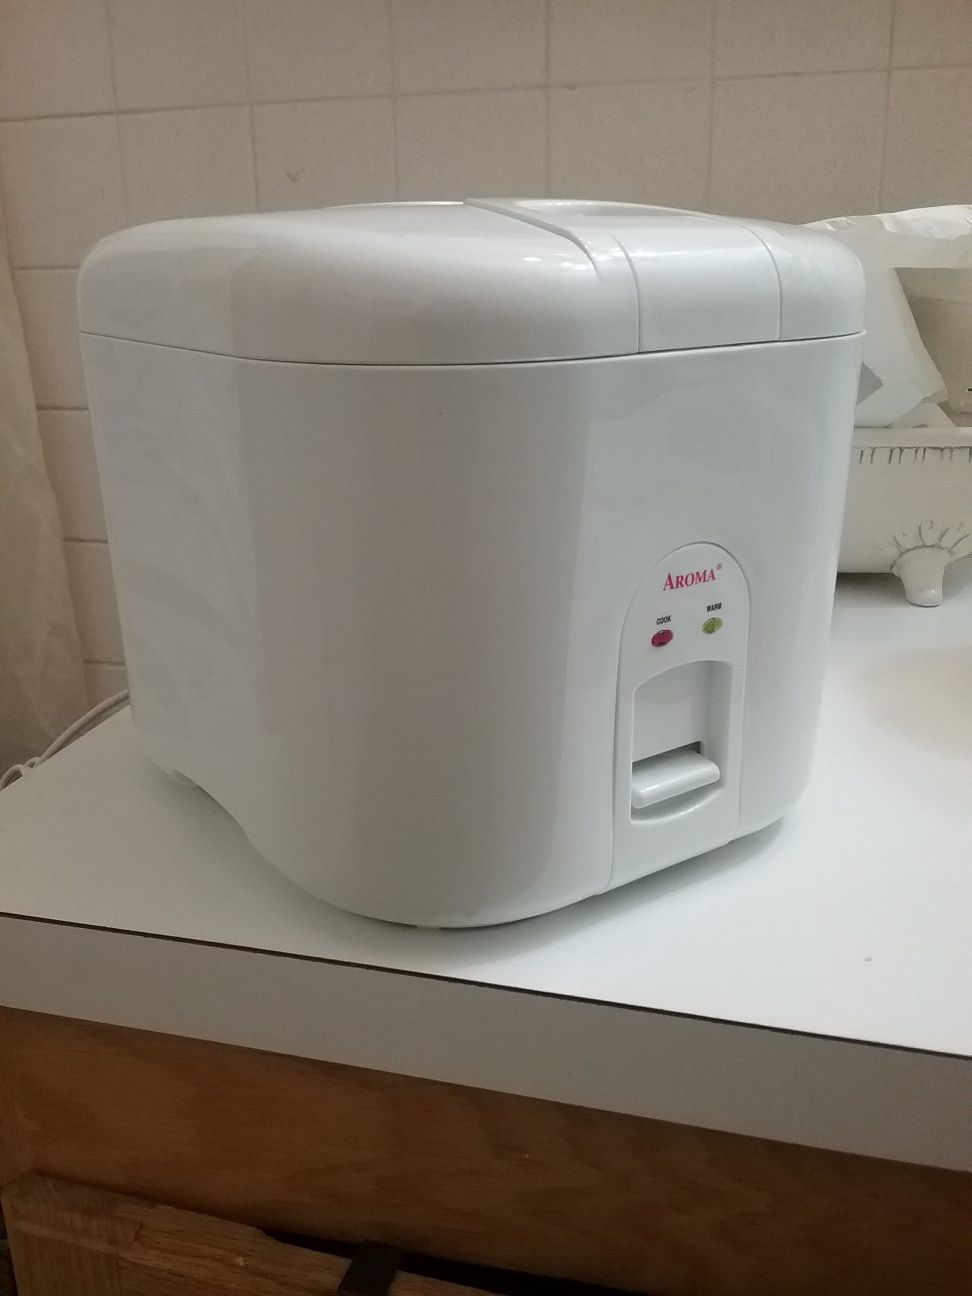 Rice Cooker 8 Cup - PARS KHAZAR Automatic for Sale in Las Vegas, NV -  OfferUp